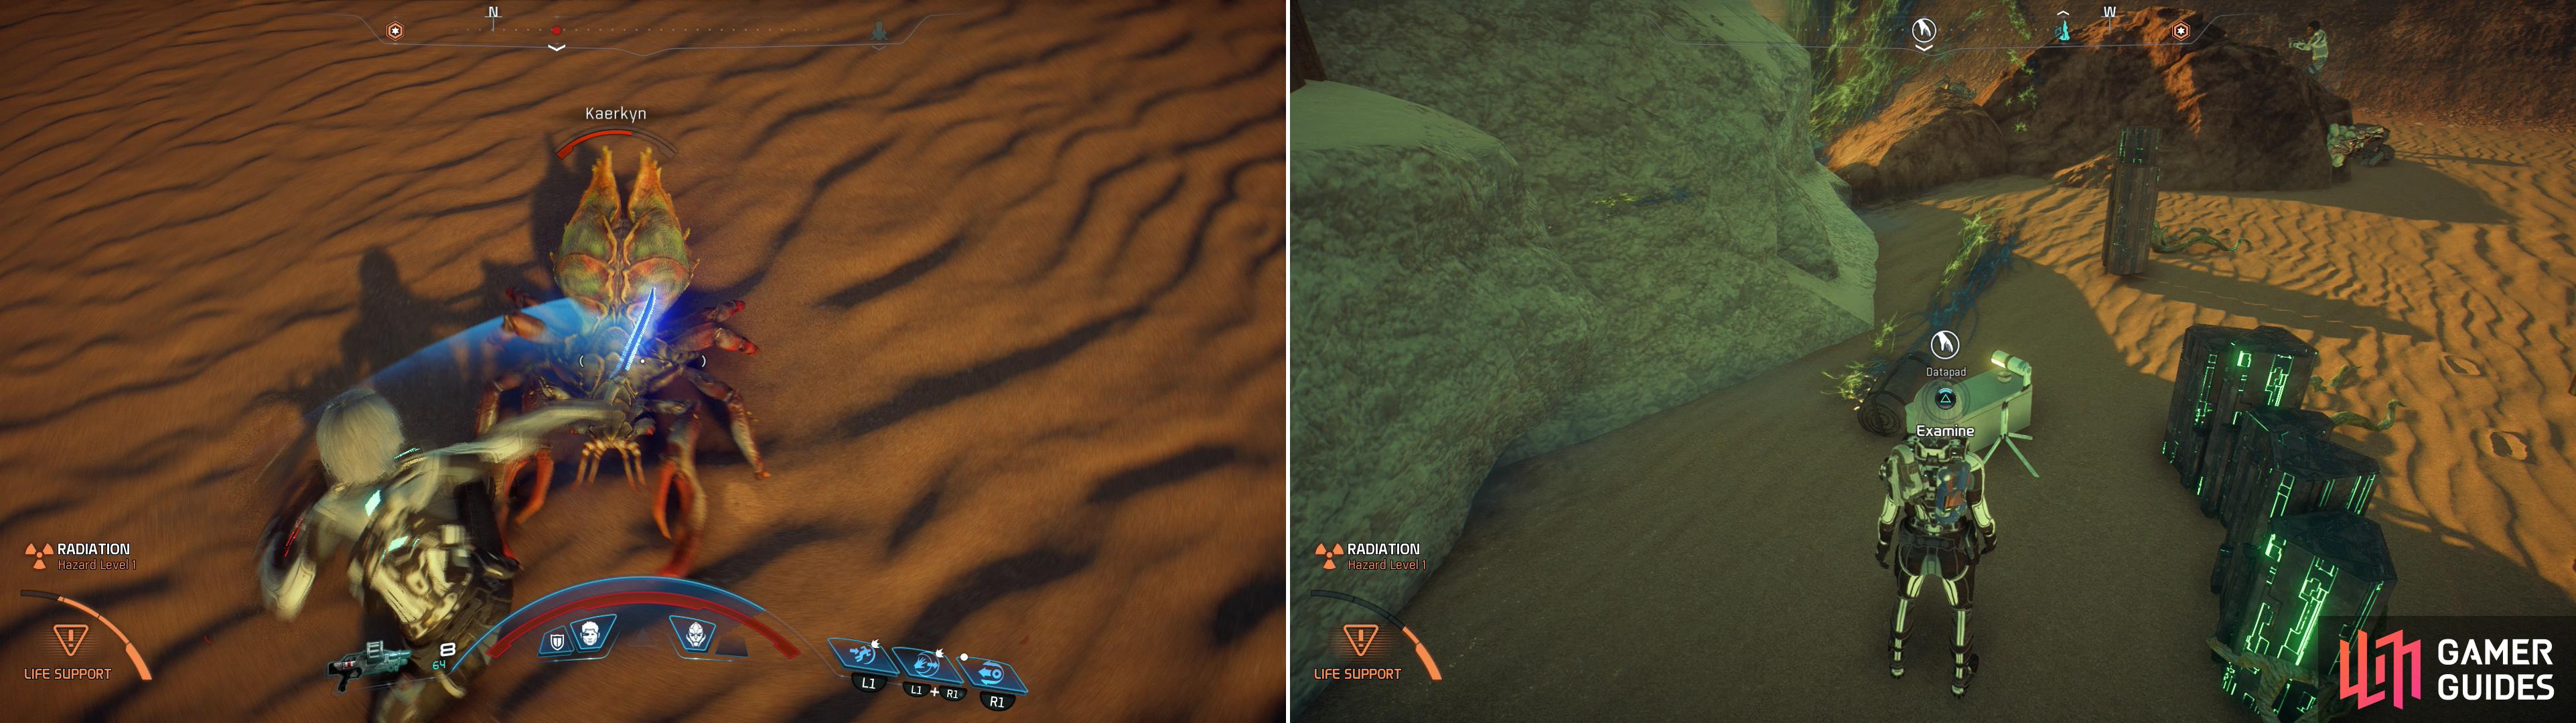 Killing Kaerkyns in the wilderness of Eos can prove quite lucrative (left). Finding Datapads at random Remnant sites will start the quest “Task: The Ghost of Promise” (right).